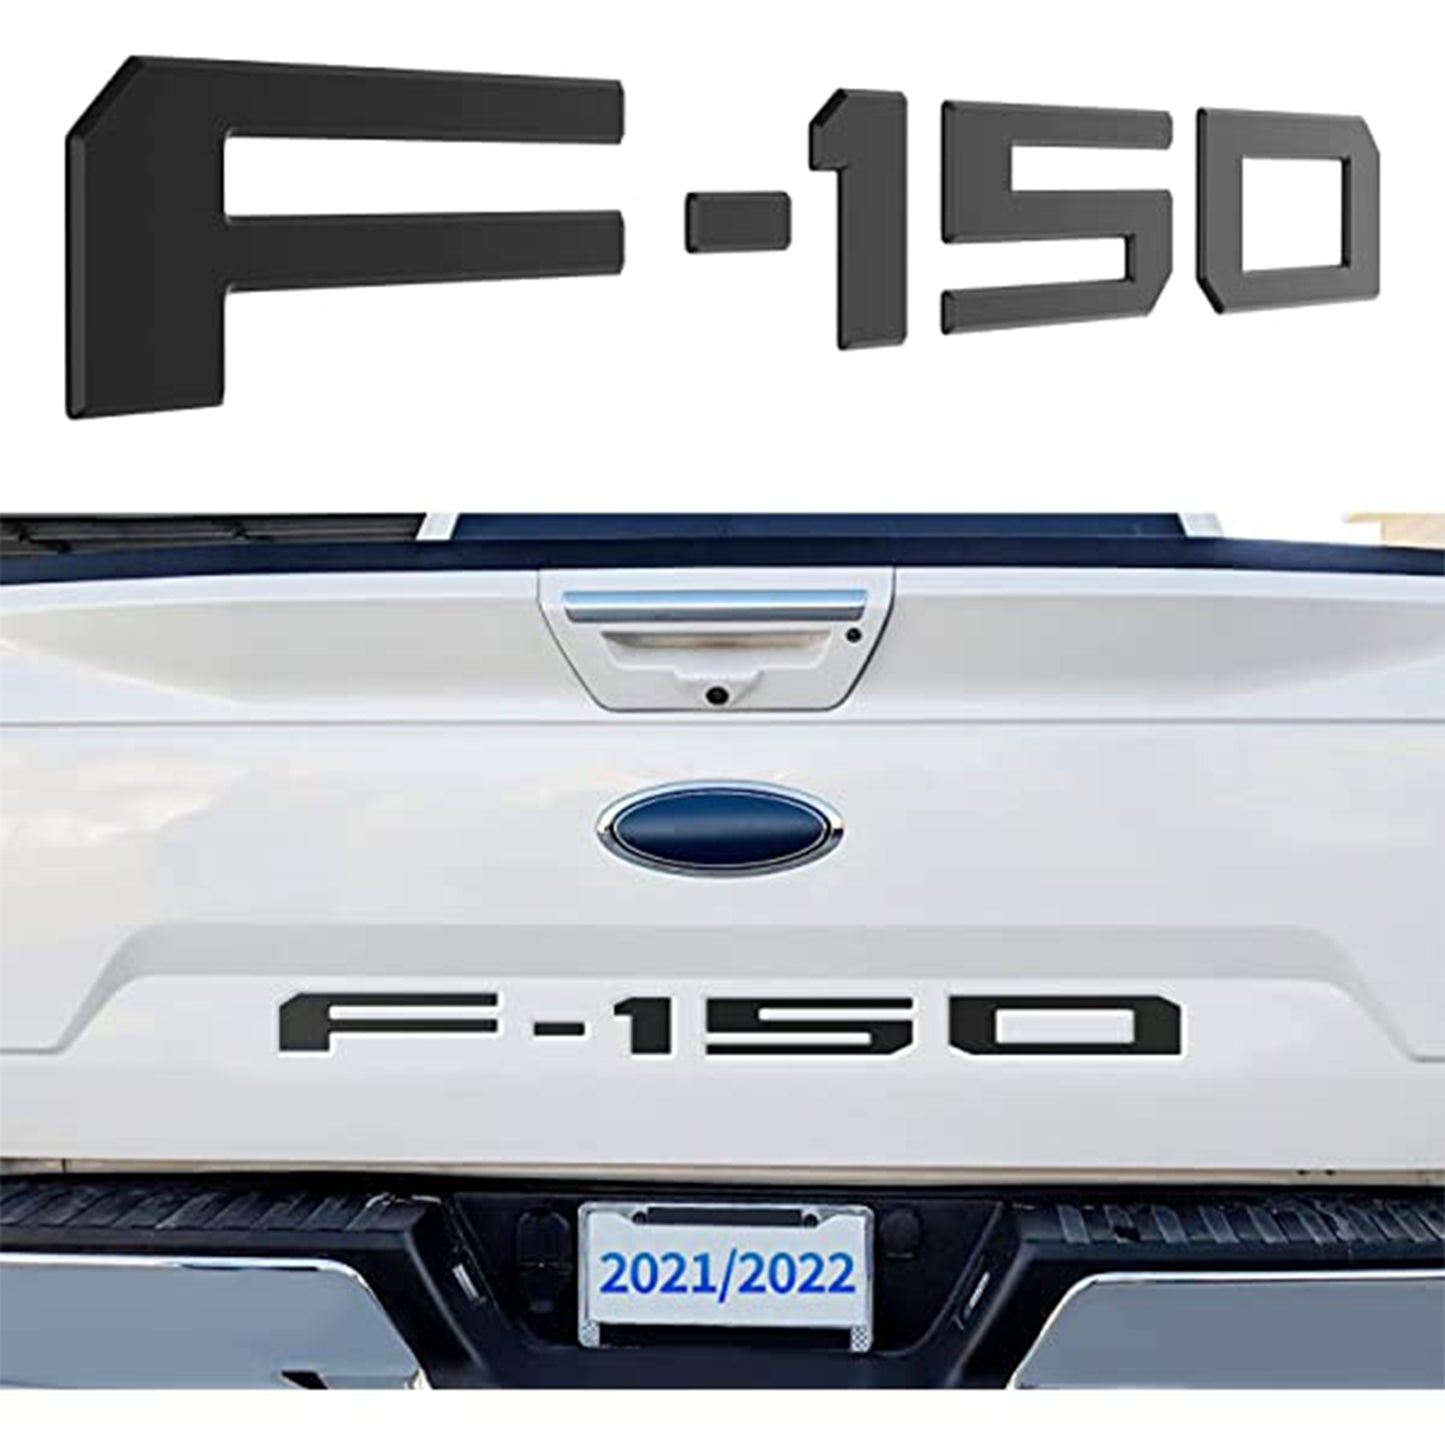 2021 2022 Ford F-150 Tailgate Letters Premium Emblem Decal Sticker